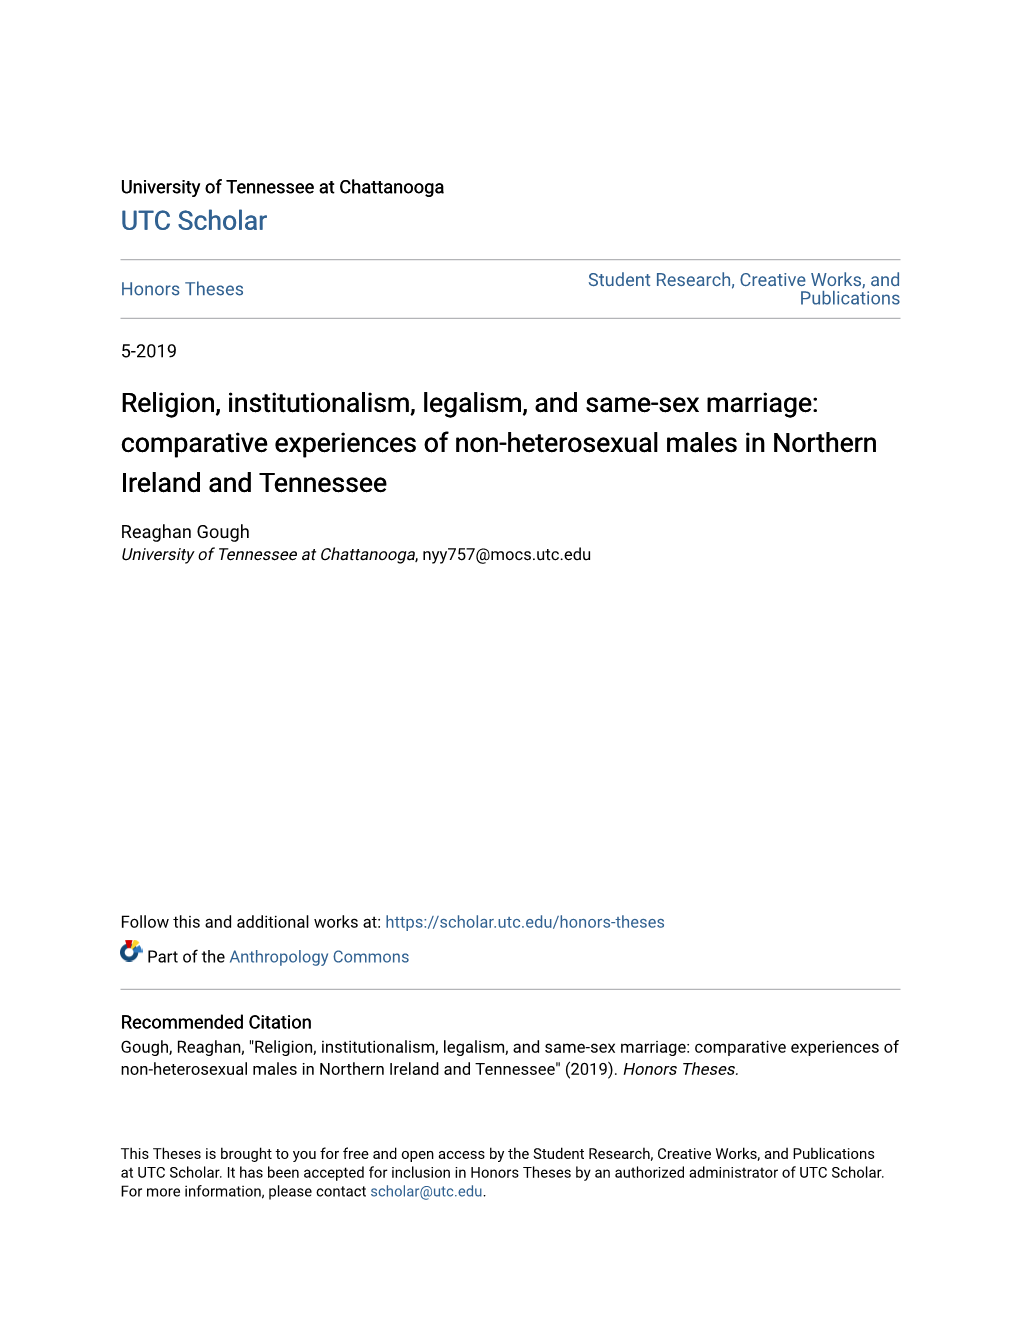 Religion, Institutionalism, Legalism, and Same-Sex Marriage: Comparative Experiences of Non-Heterosexual Males in Northern Ireland and Tennessee